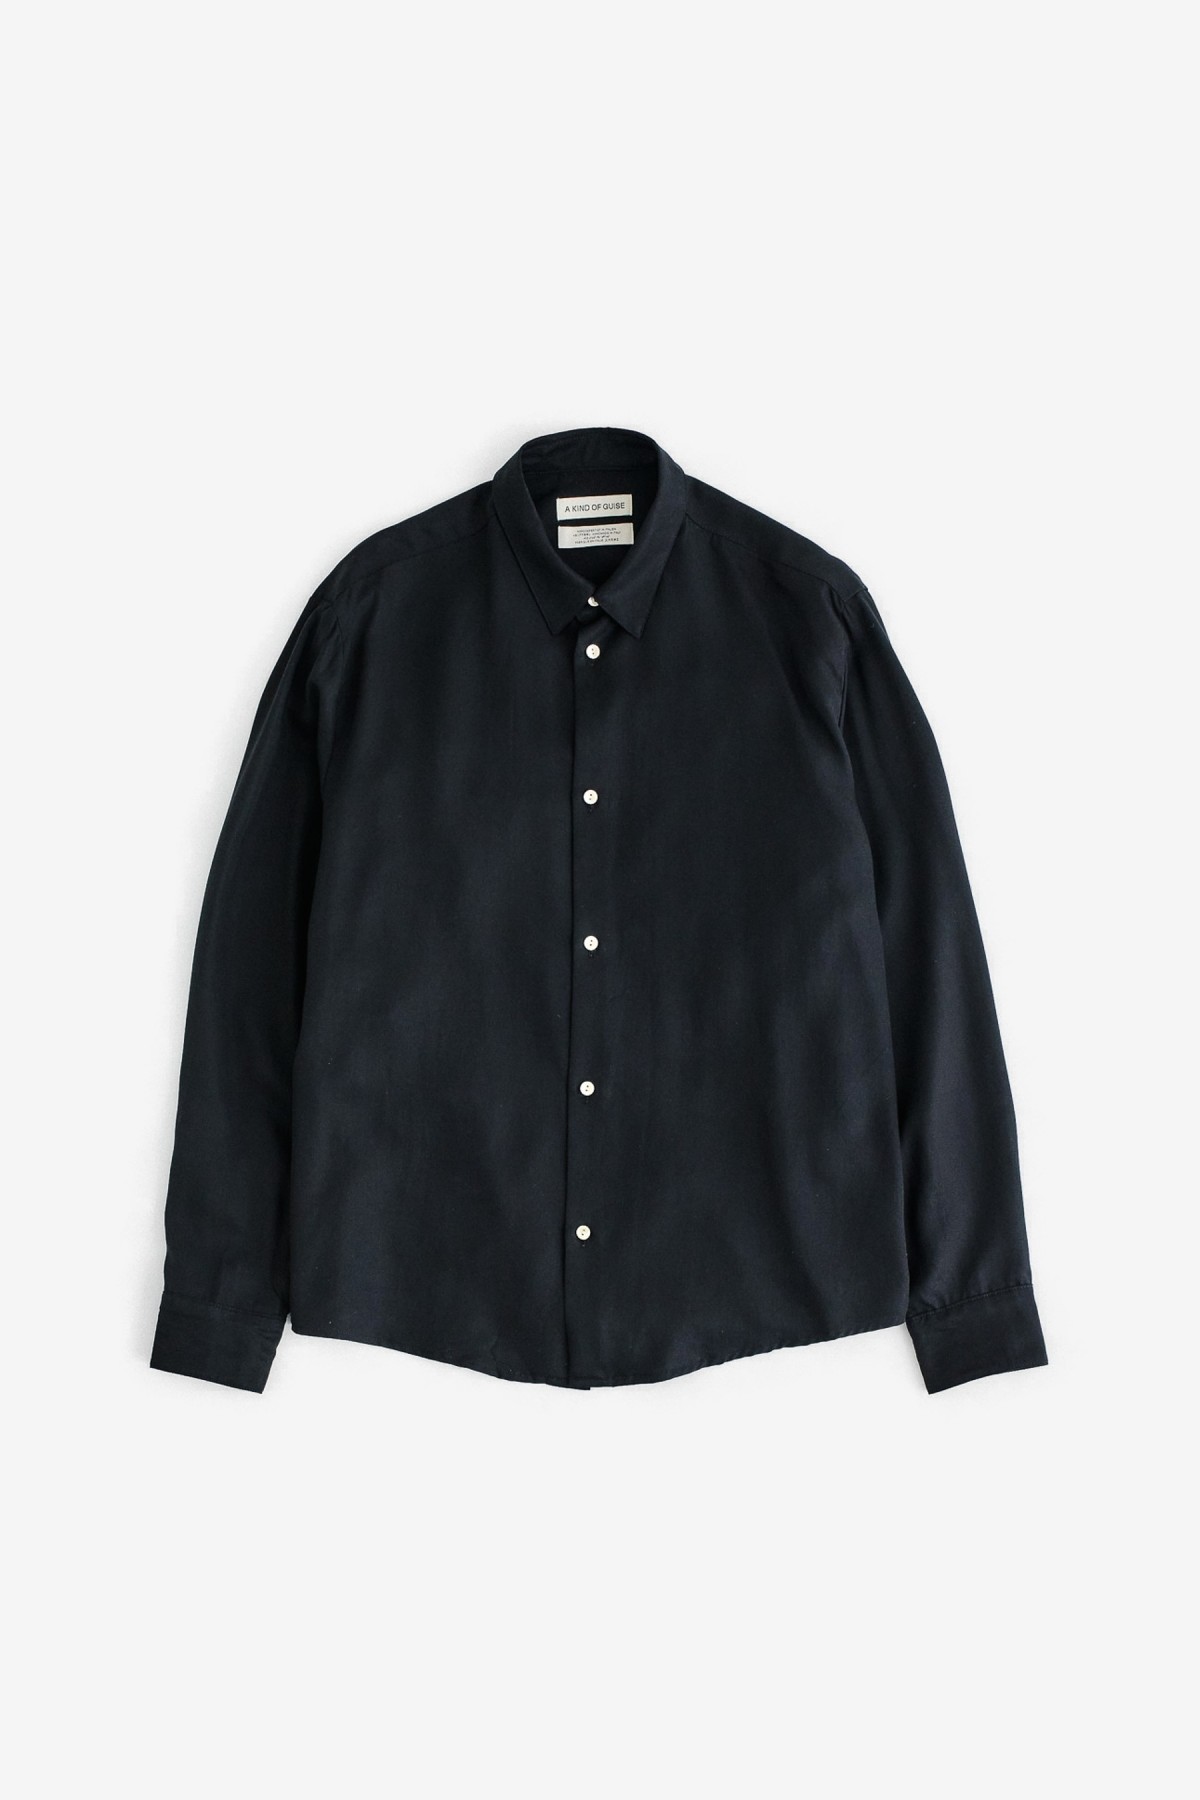 A Kind of Guise Fulvio Shirt in Melted Black